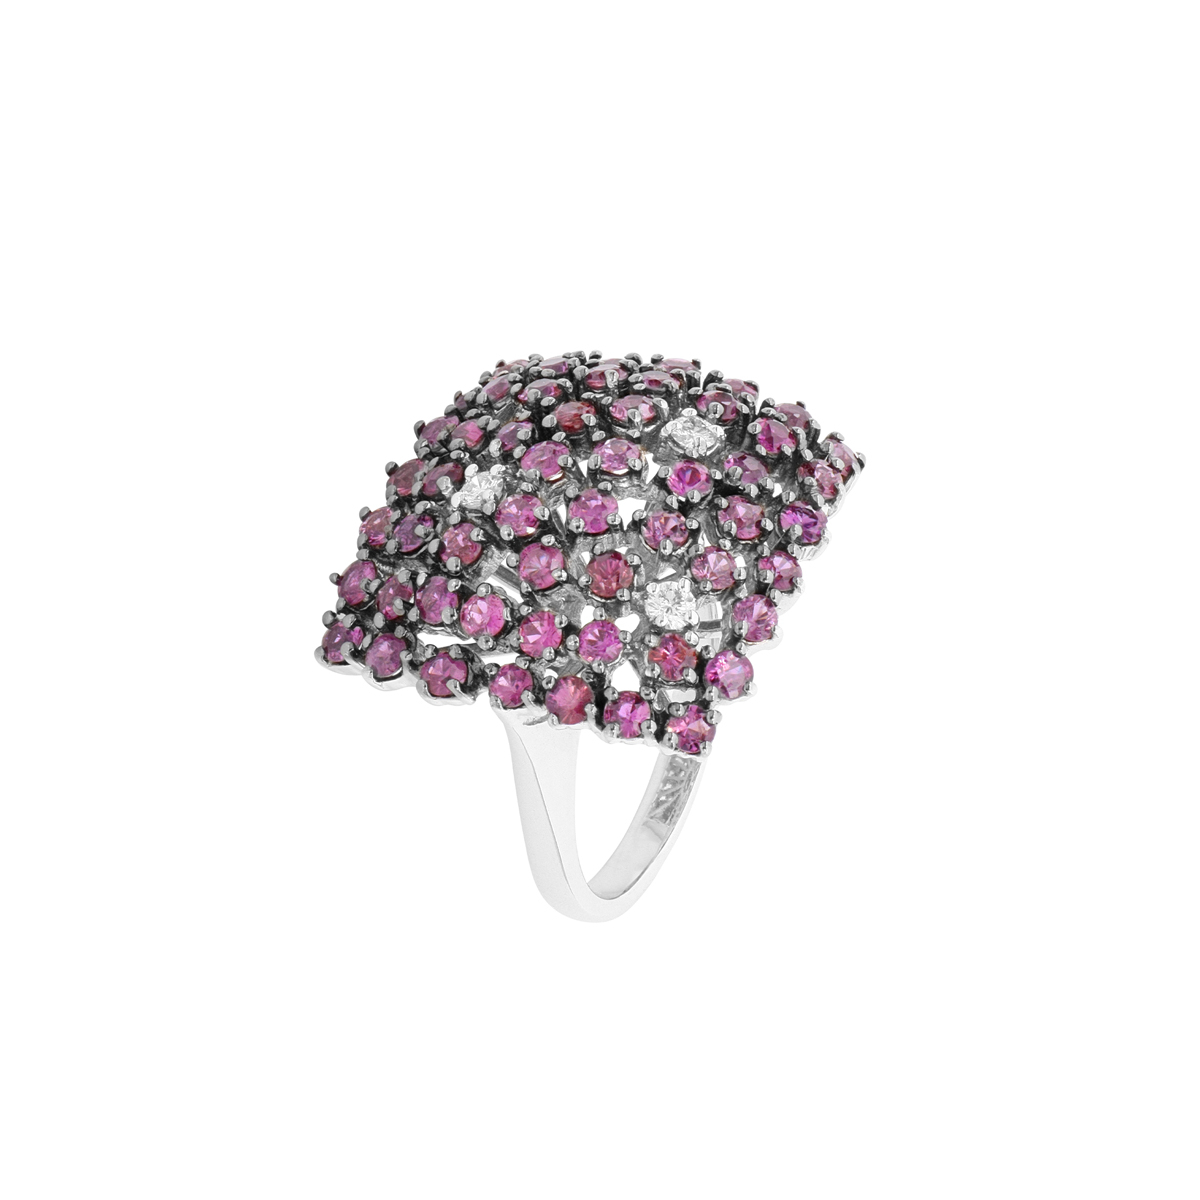 18 K White Gold Ring with Diamonds and Rubies